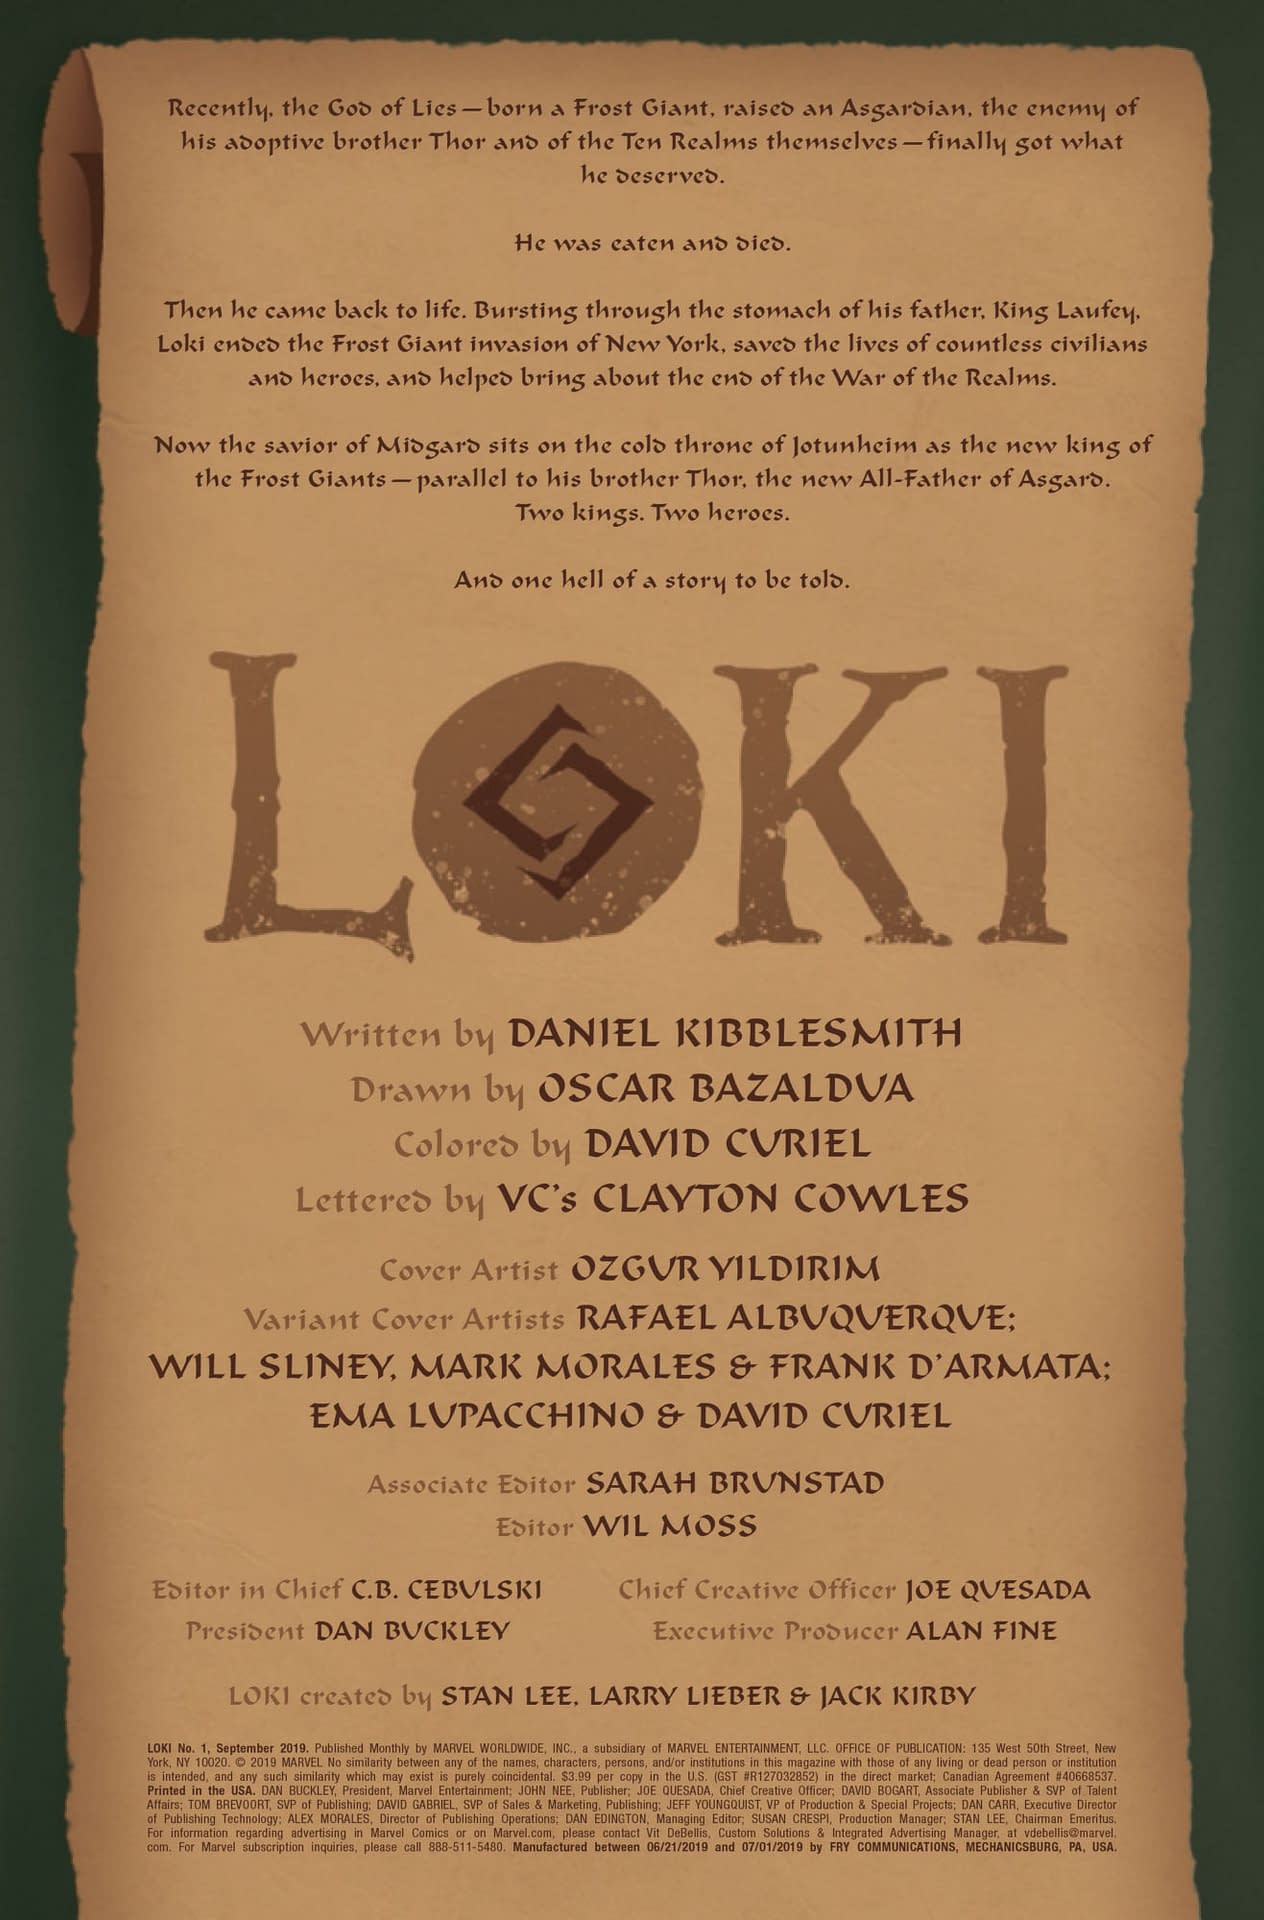 Loki #1: The Post-War-of-the-Realms Status Quo [Preview]